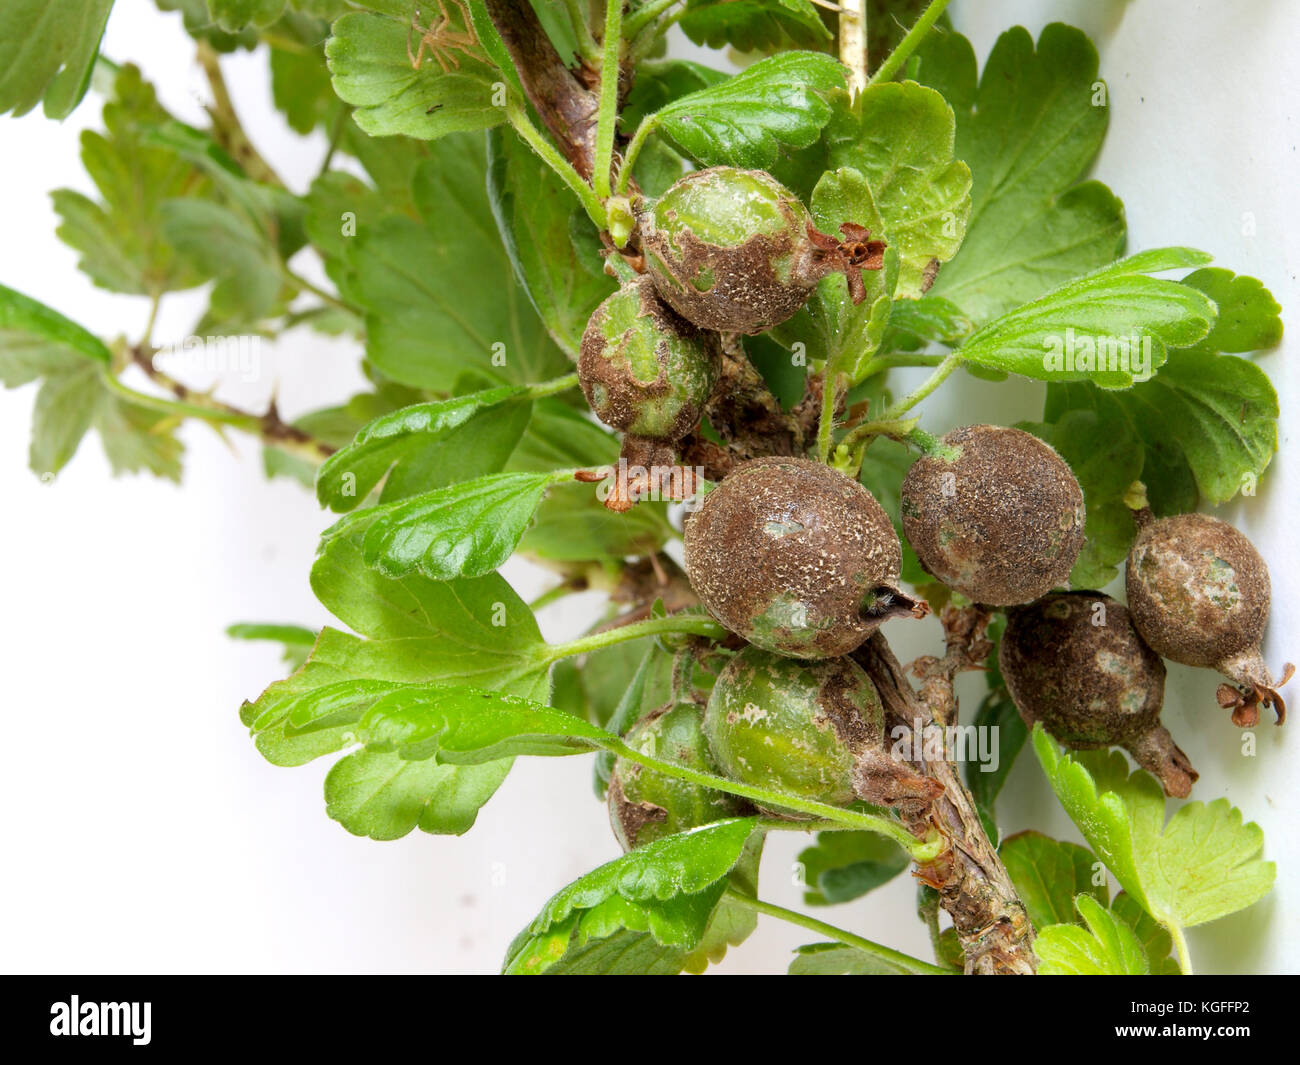 Gooseberries infected and damaged by fungus disease powdery mildew close up. Stock Photo